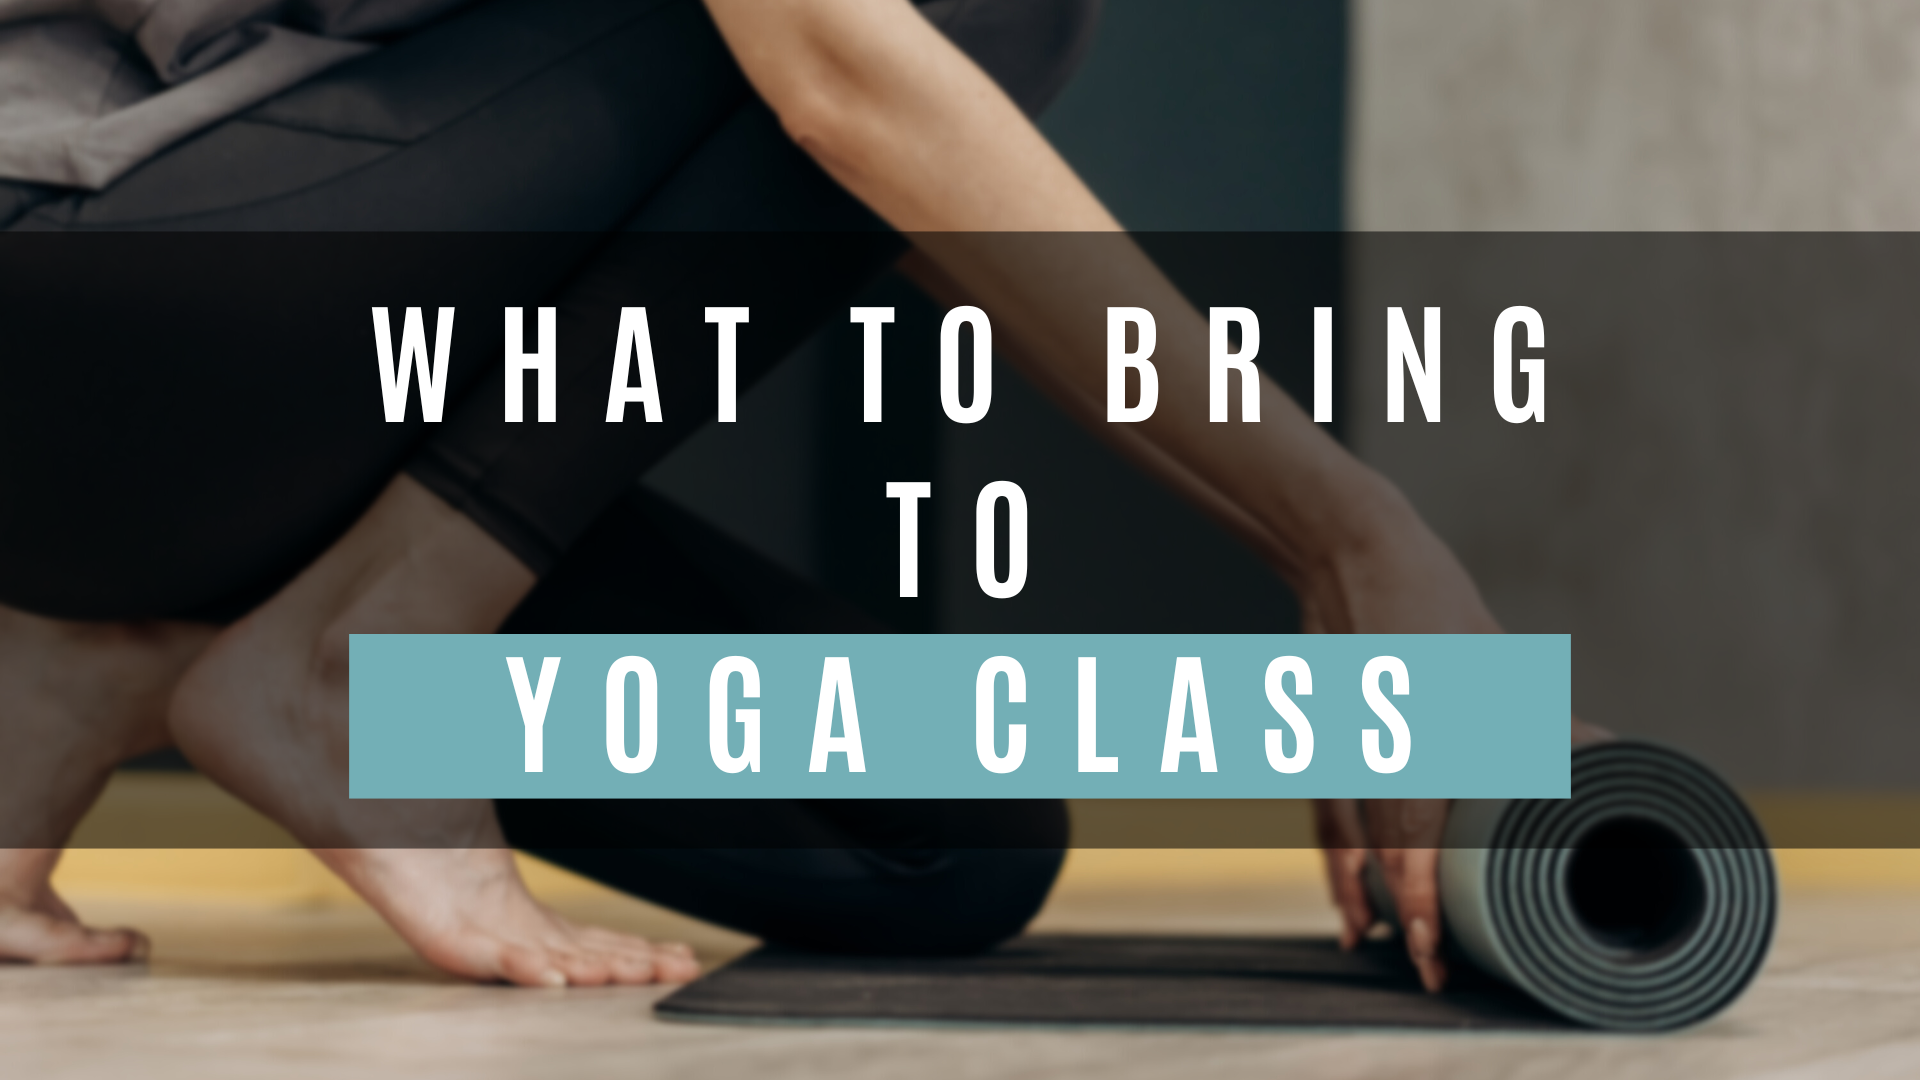 Top 5 Things to Bring to a Yoga Class - Drummond Education